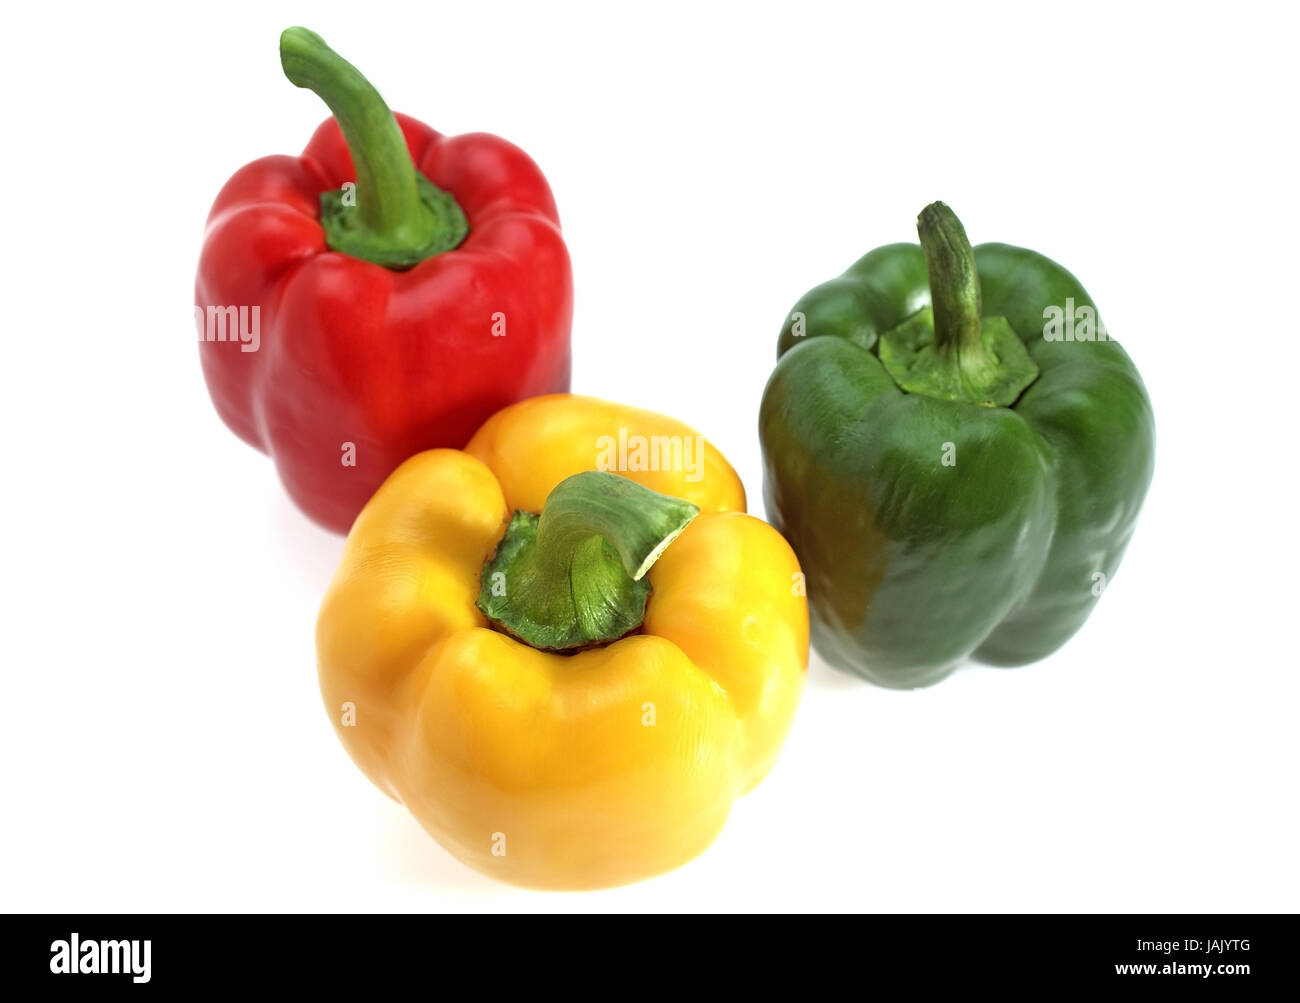 Green capsicum Cut Out Stock Images & Pictures - Alamy